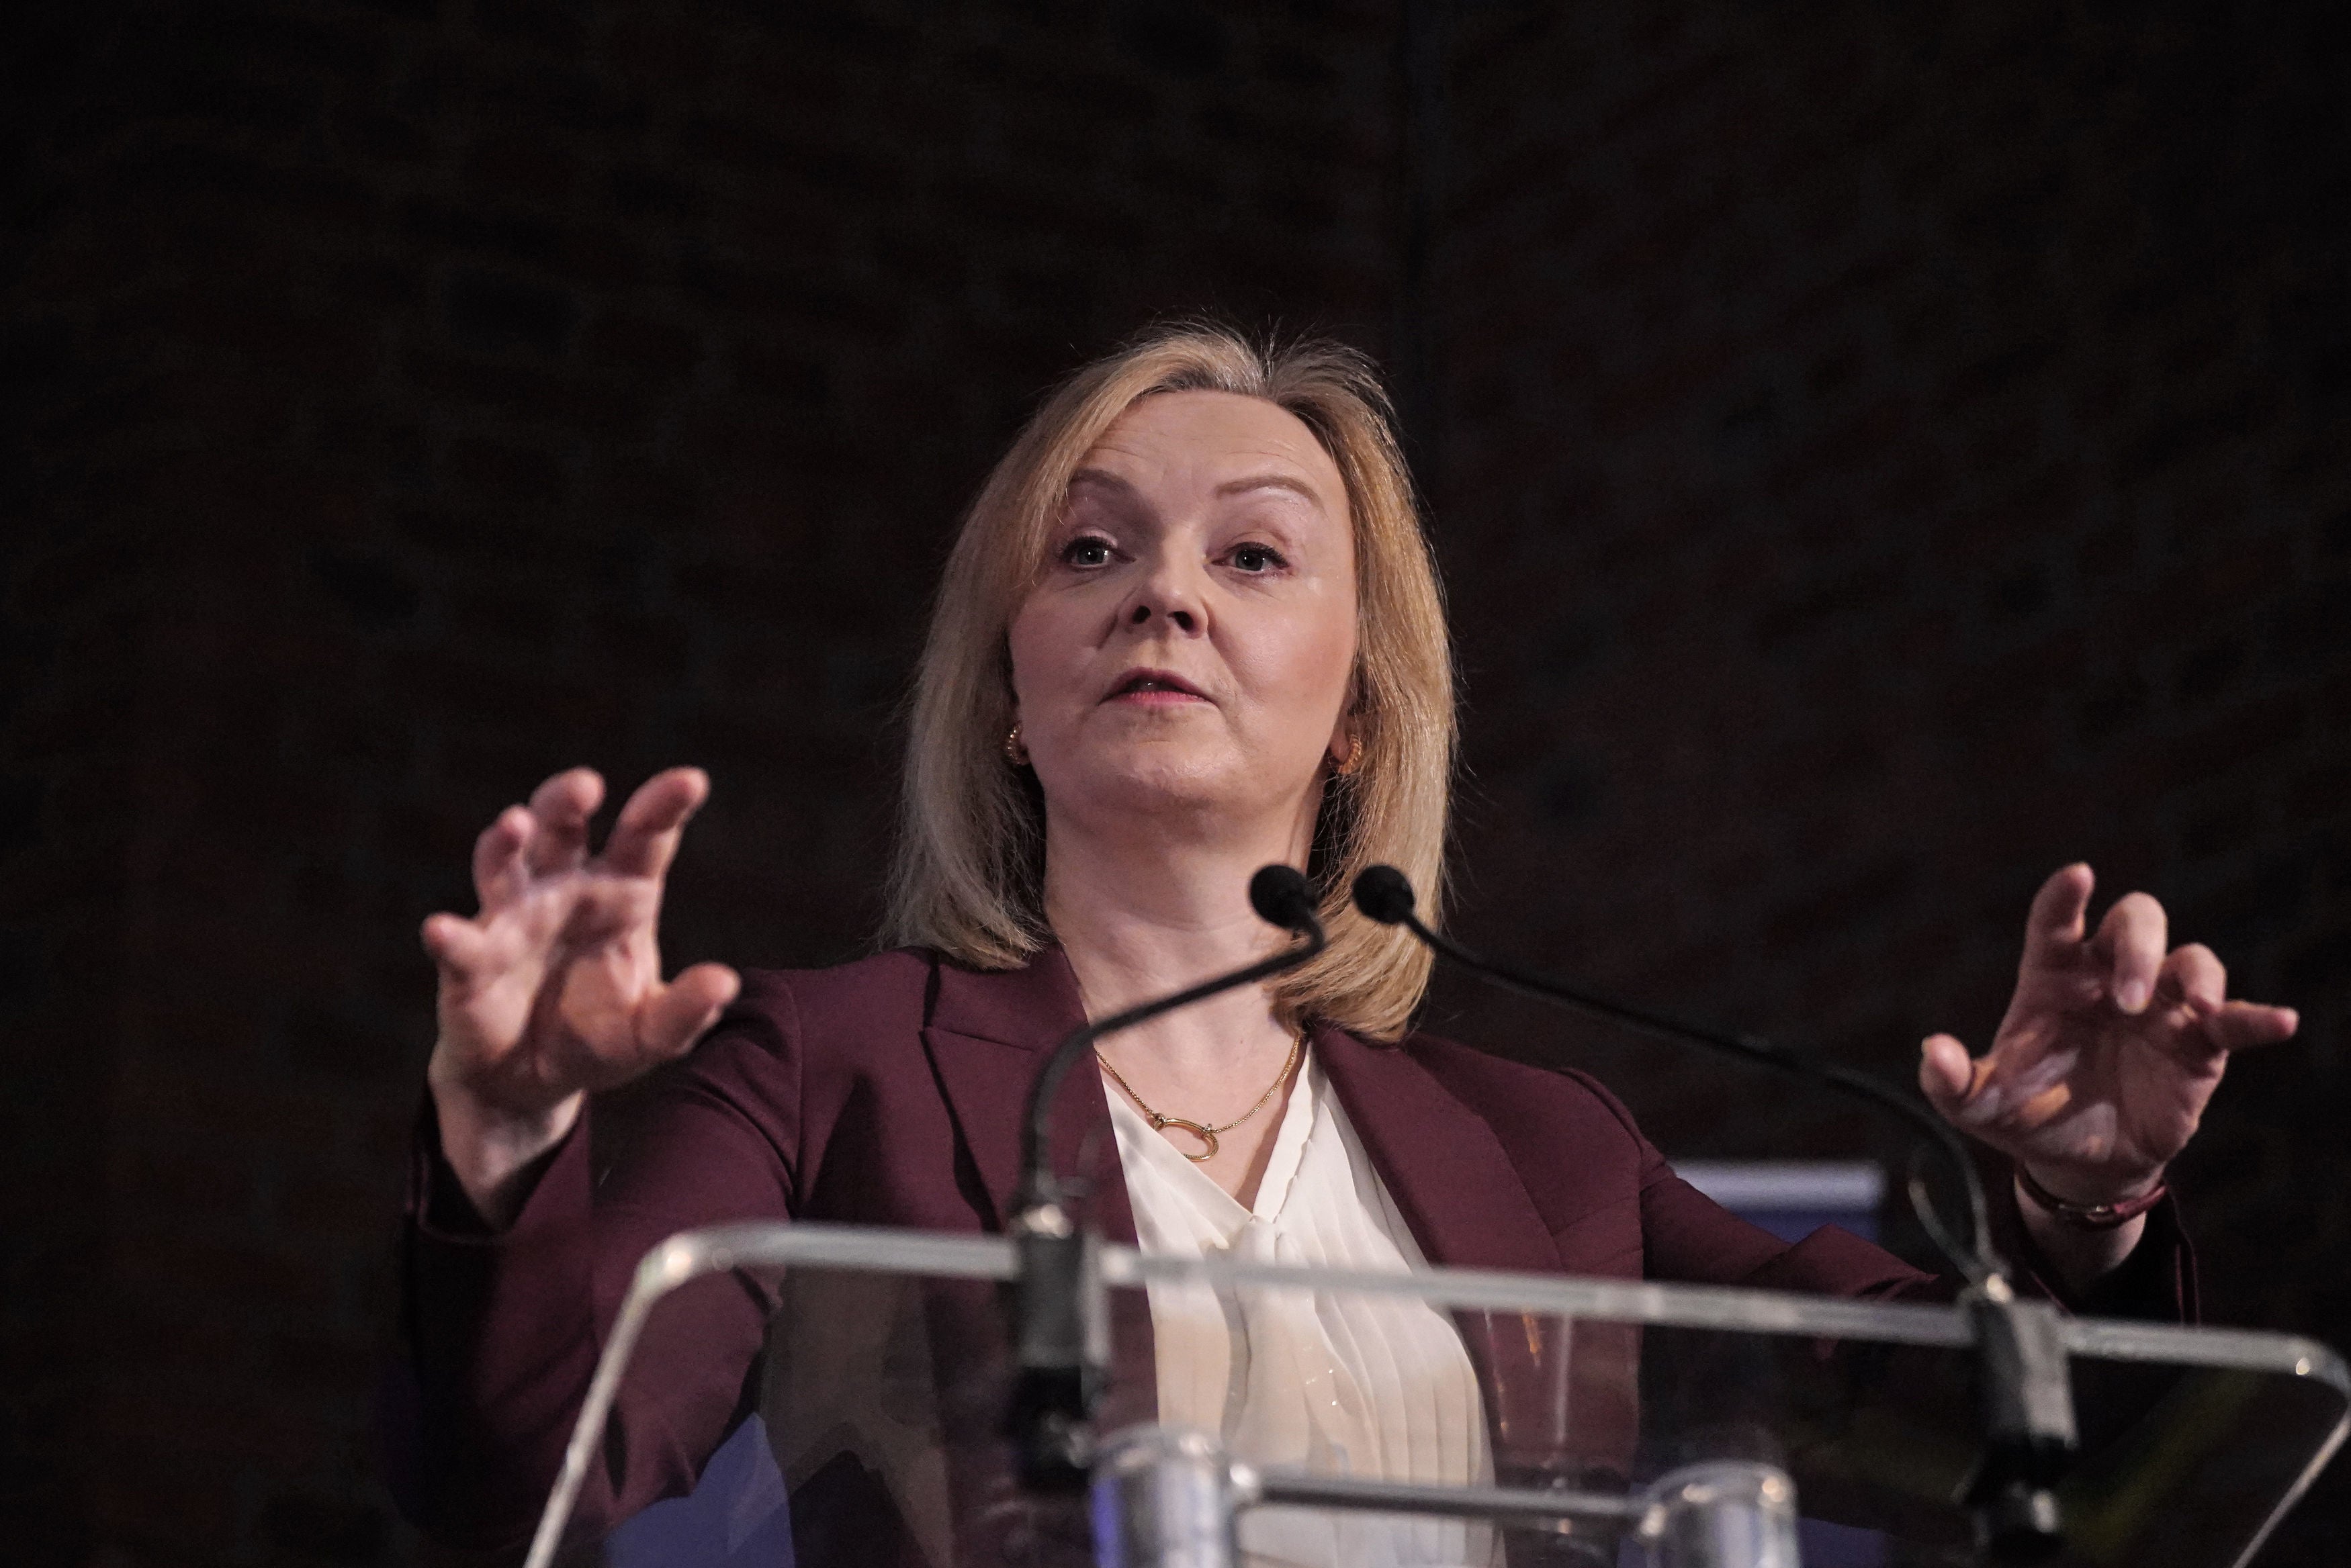 Liz Truss, the former prime minister, is due to speak at C-PAC, the Washington conservative conference, ahead of Donald Trump